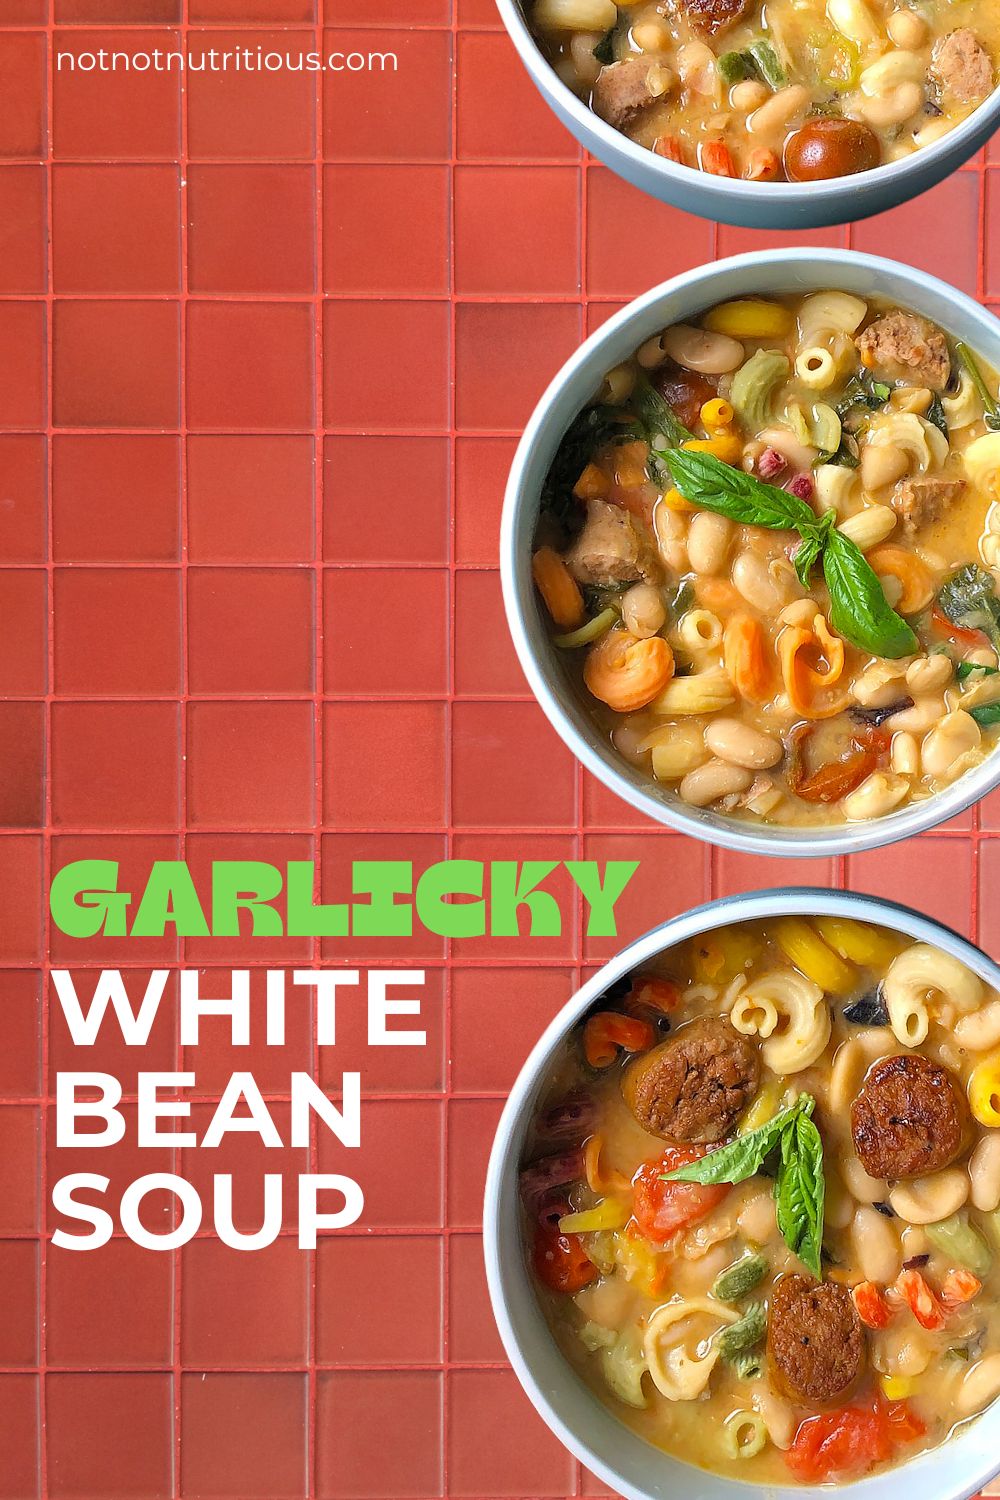 Pin for Garlicky White Bean Soup with plant-based sausage. Three bowls of soup on red tile.